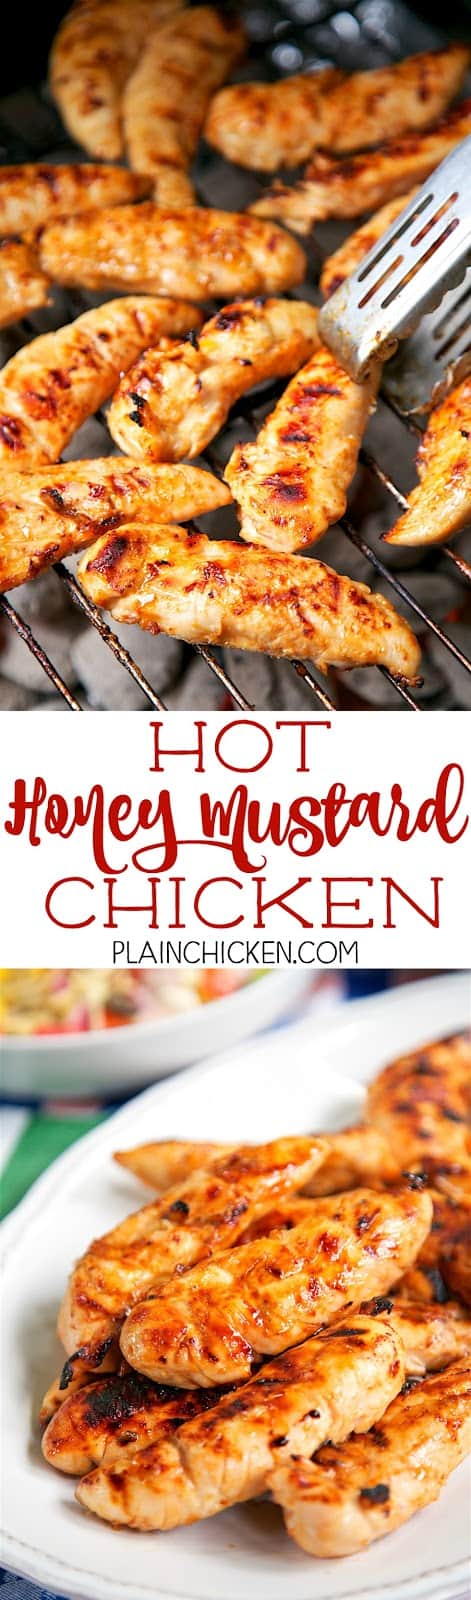 Hot Honey Mustard Chicken - only 4 ingredients including the chicken! Honey, mustard, hot sauce and chicken. Can grill or cook on the stove. This chicken is CRAZY good! Sweet with a little heat! Great for a crowd and tailgating!